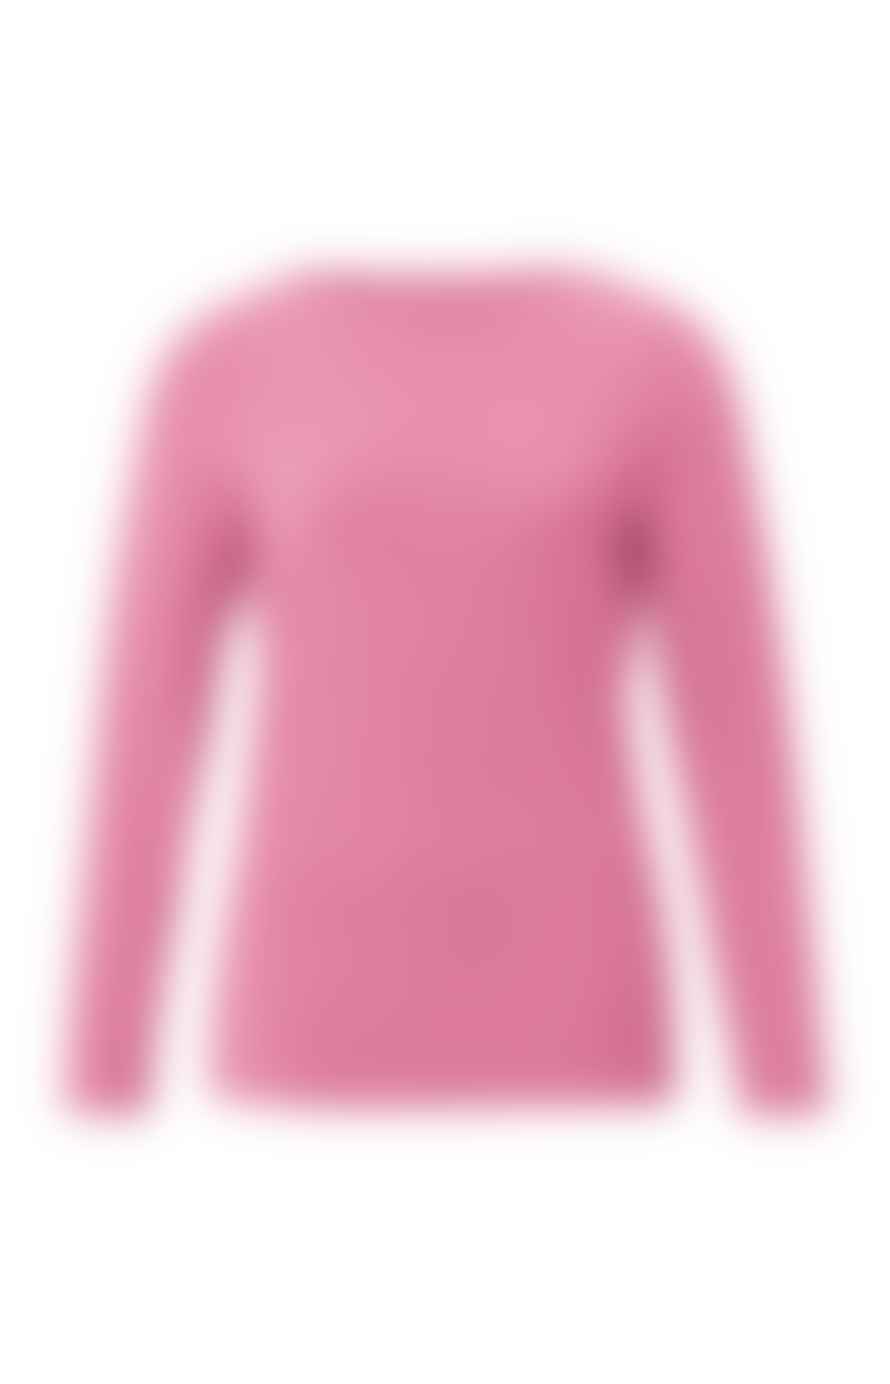 Yaya T-shirt With Boatneck And Long Sleeves In Regular Fit - Morning Glory Pink